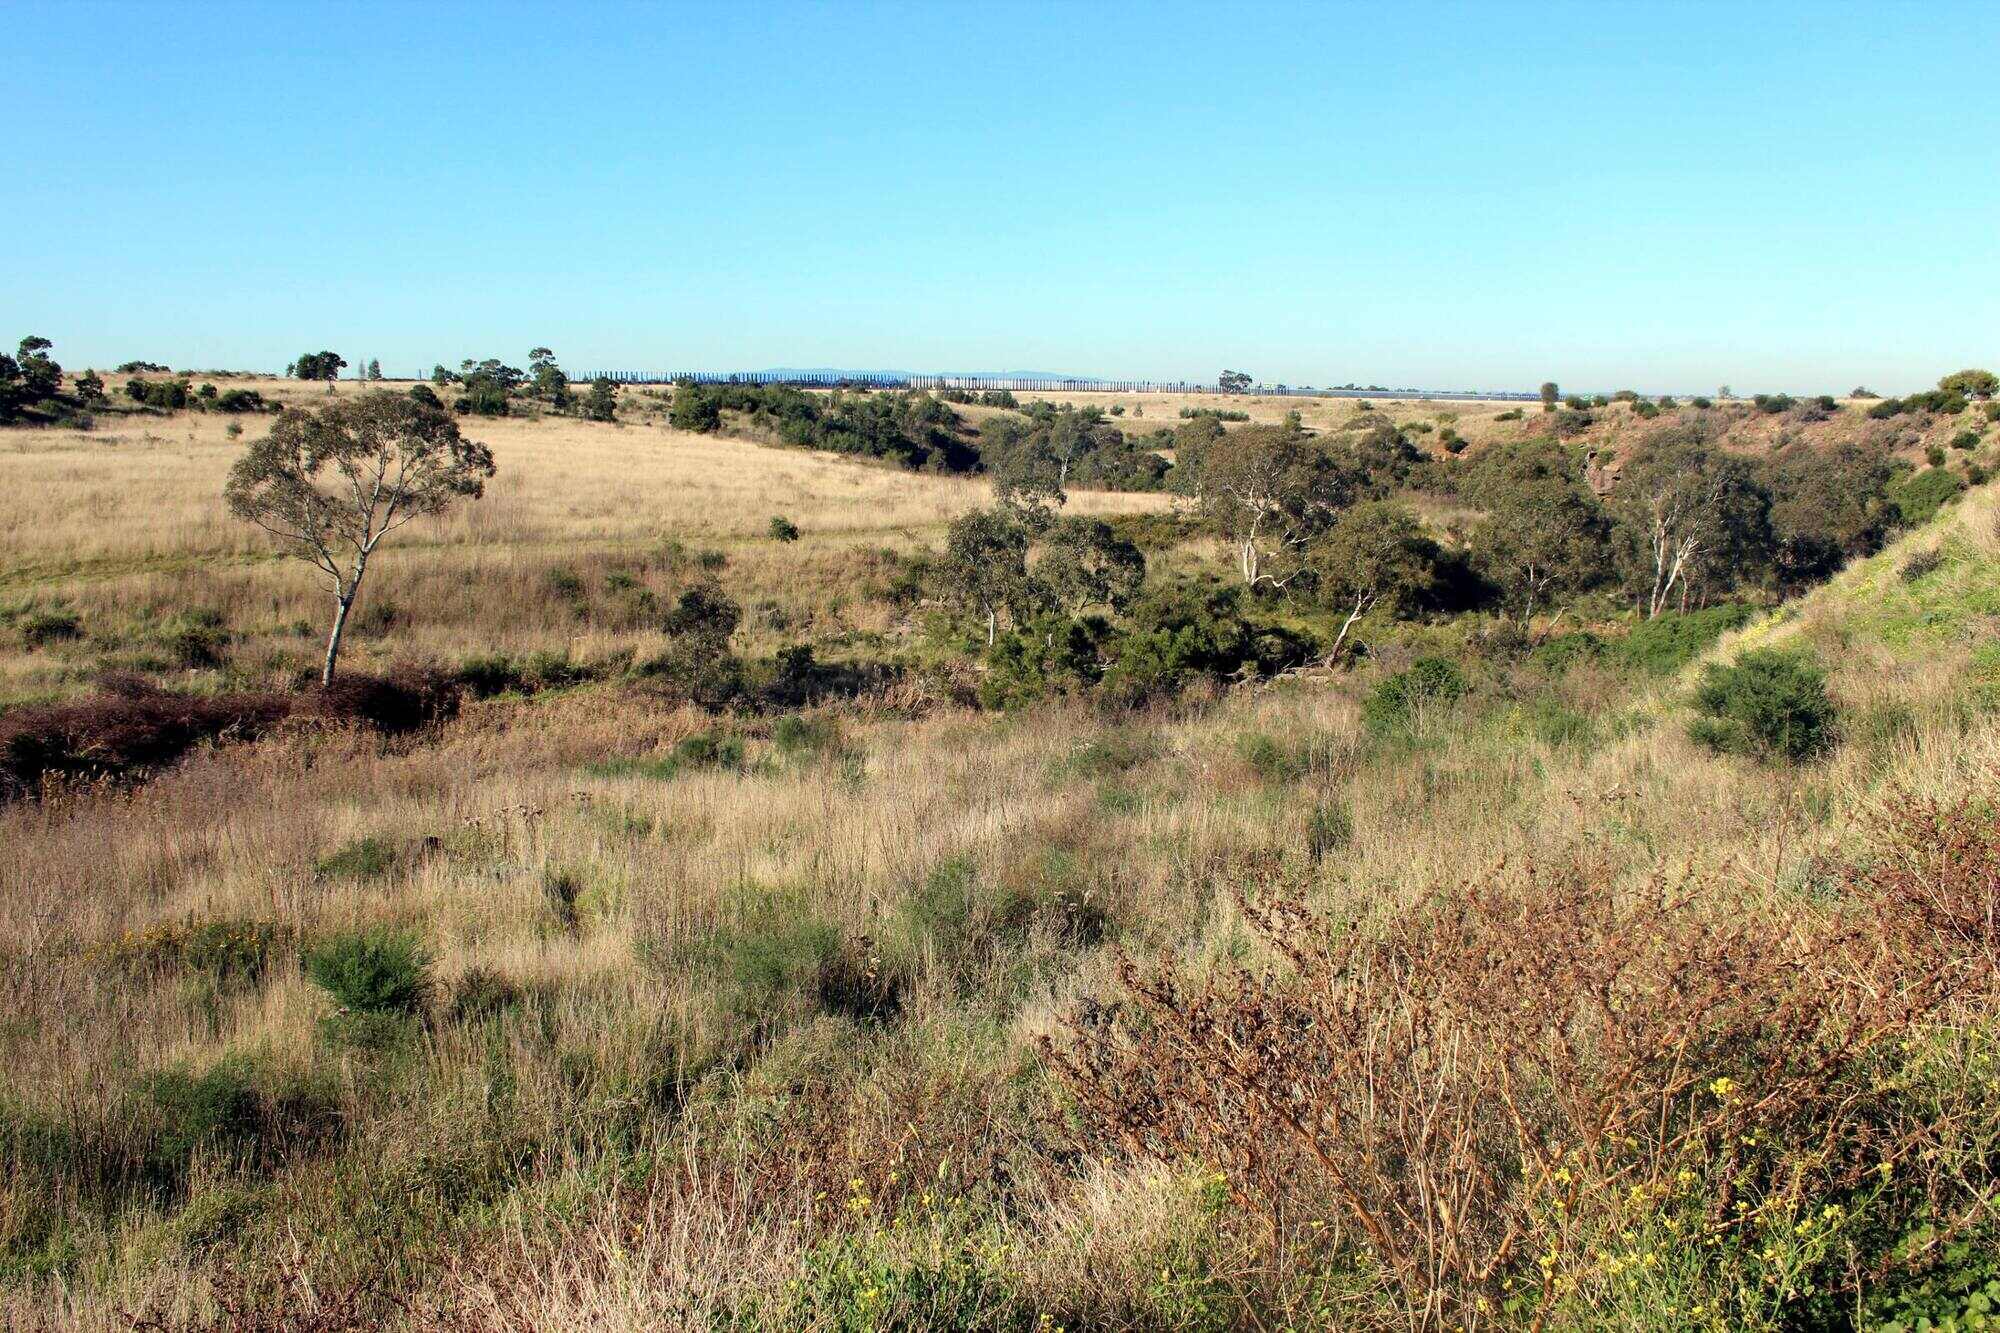 Photograph of Galada Tamboore grasslands in Australia. The photo shows a grassland in a gently rolling landscape dotted with sparse trees.